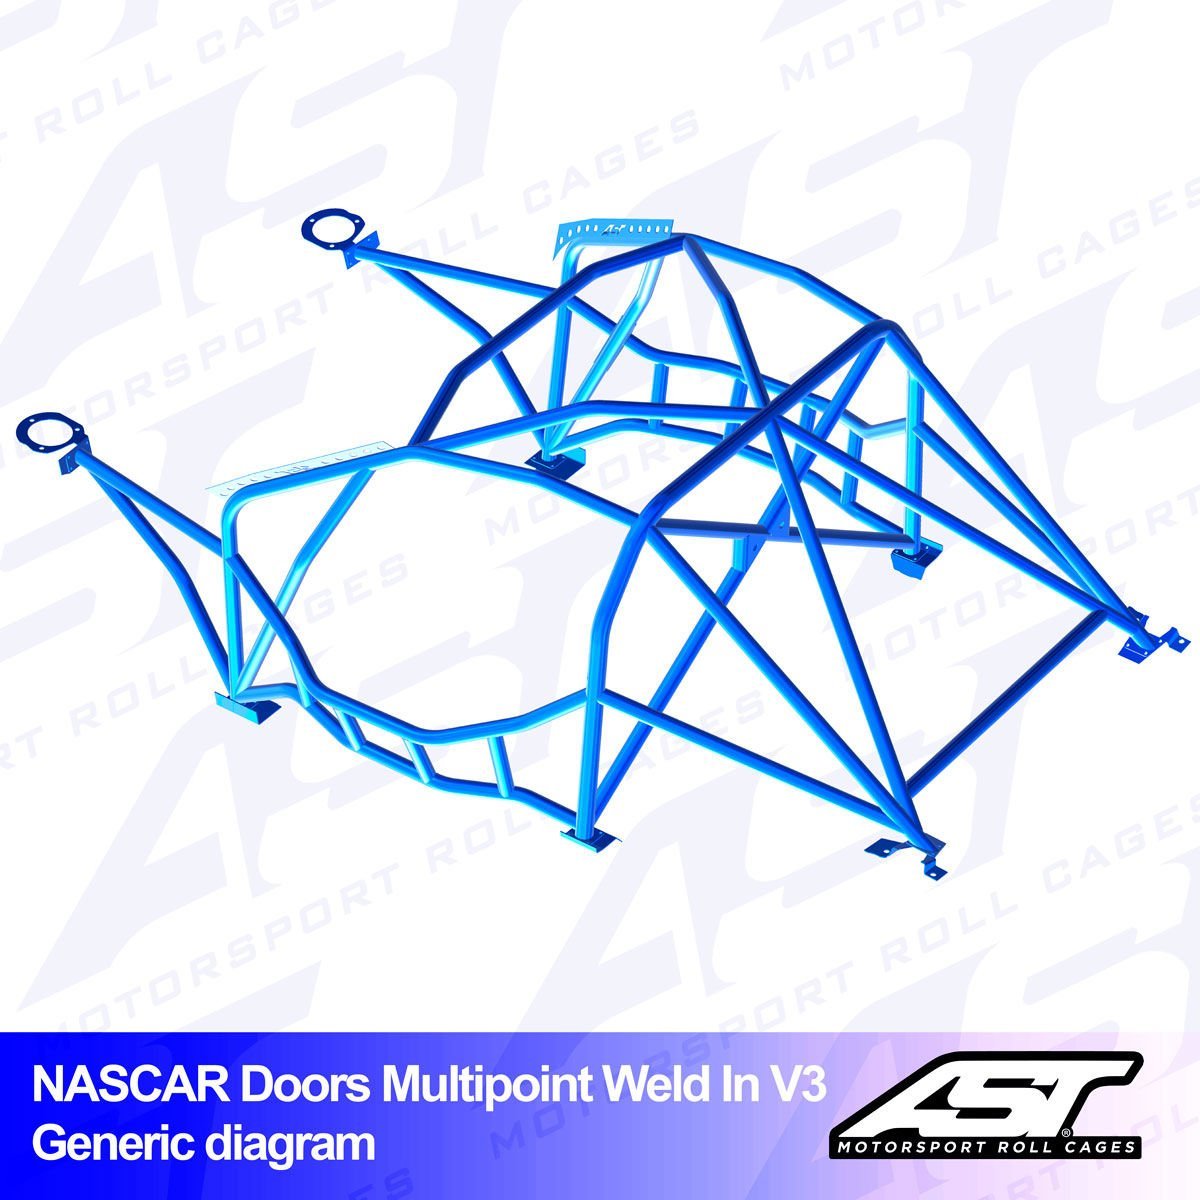 Roll Cage SCION FR-S (ZC6) 2-doors Coupe MULTIPOINT WELD IN V3 NASCAR-door for drift